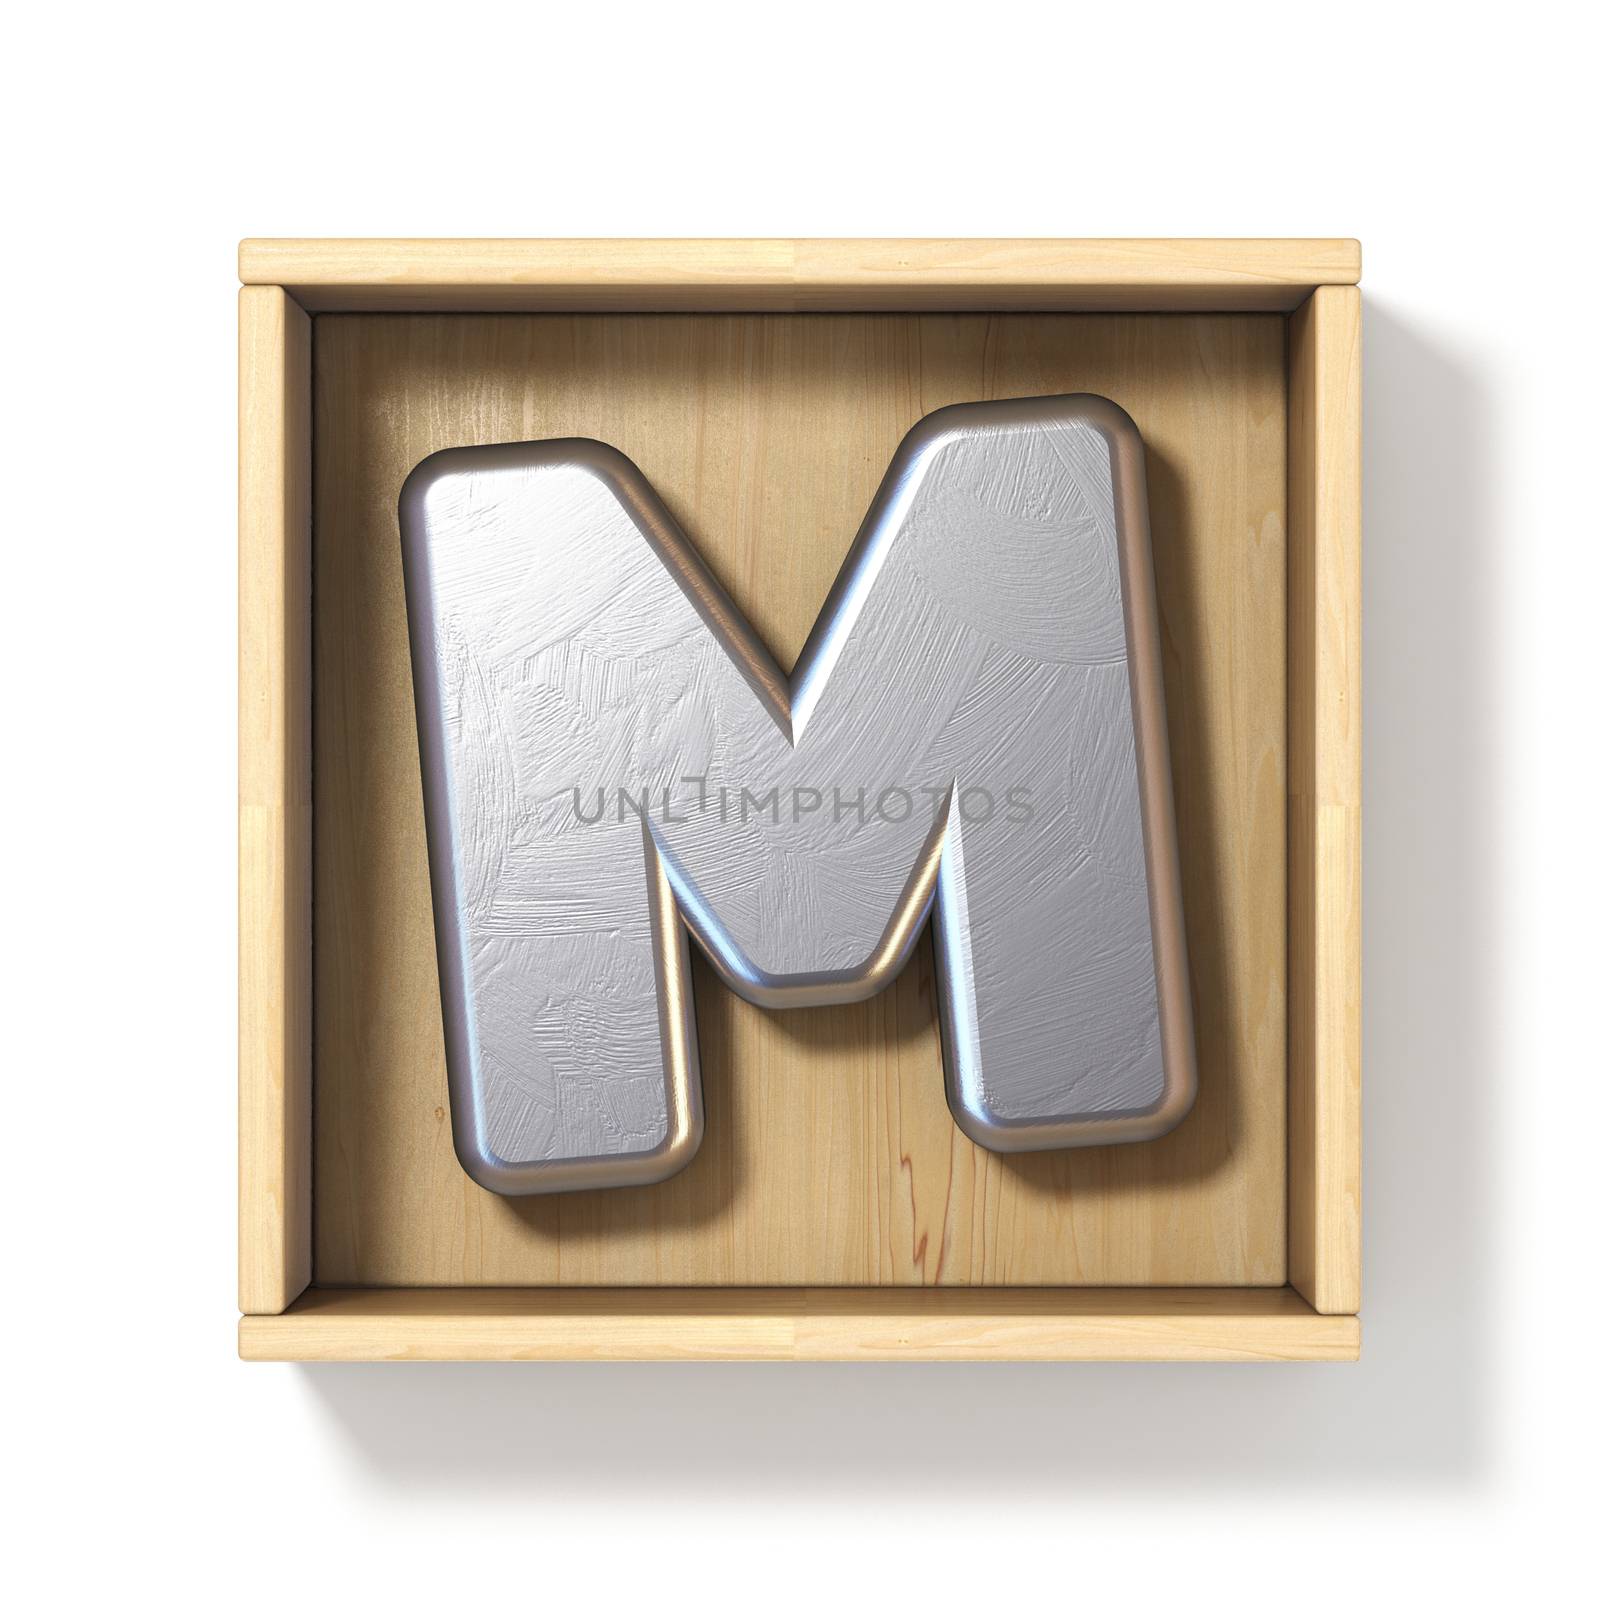 Silver metal letter M in wooden box 3D render illustration isolated on white background